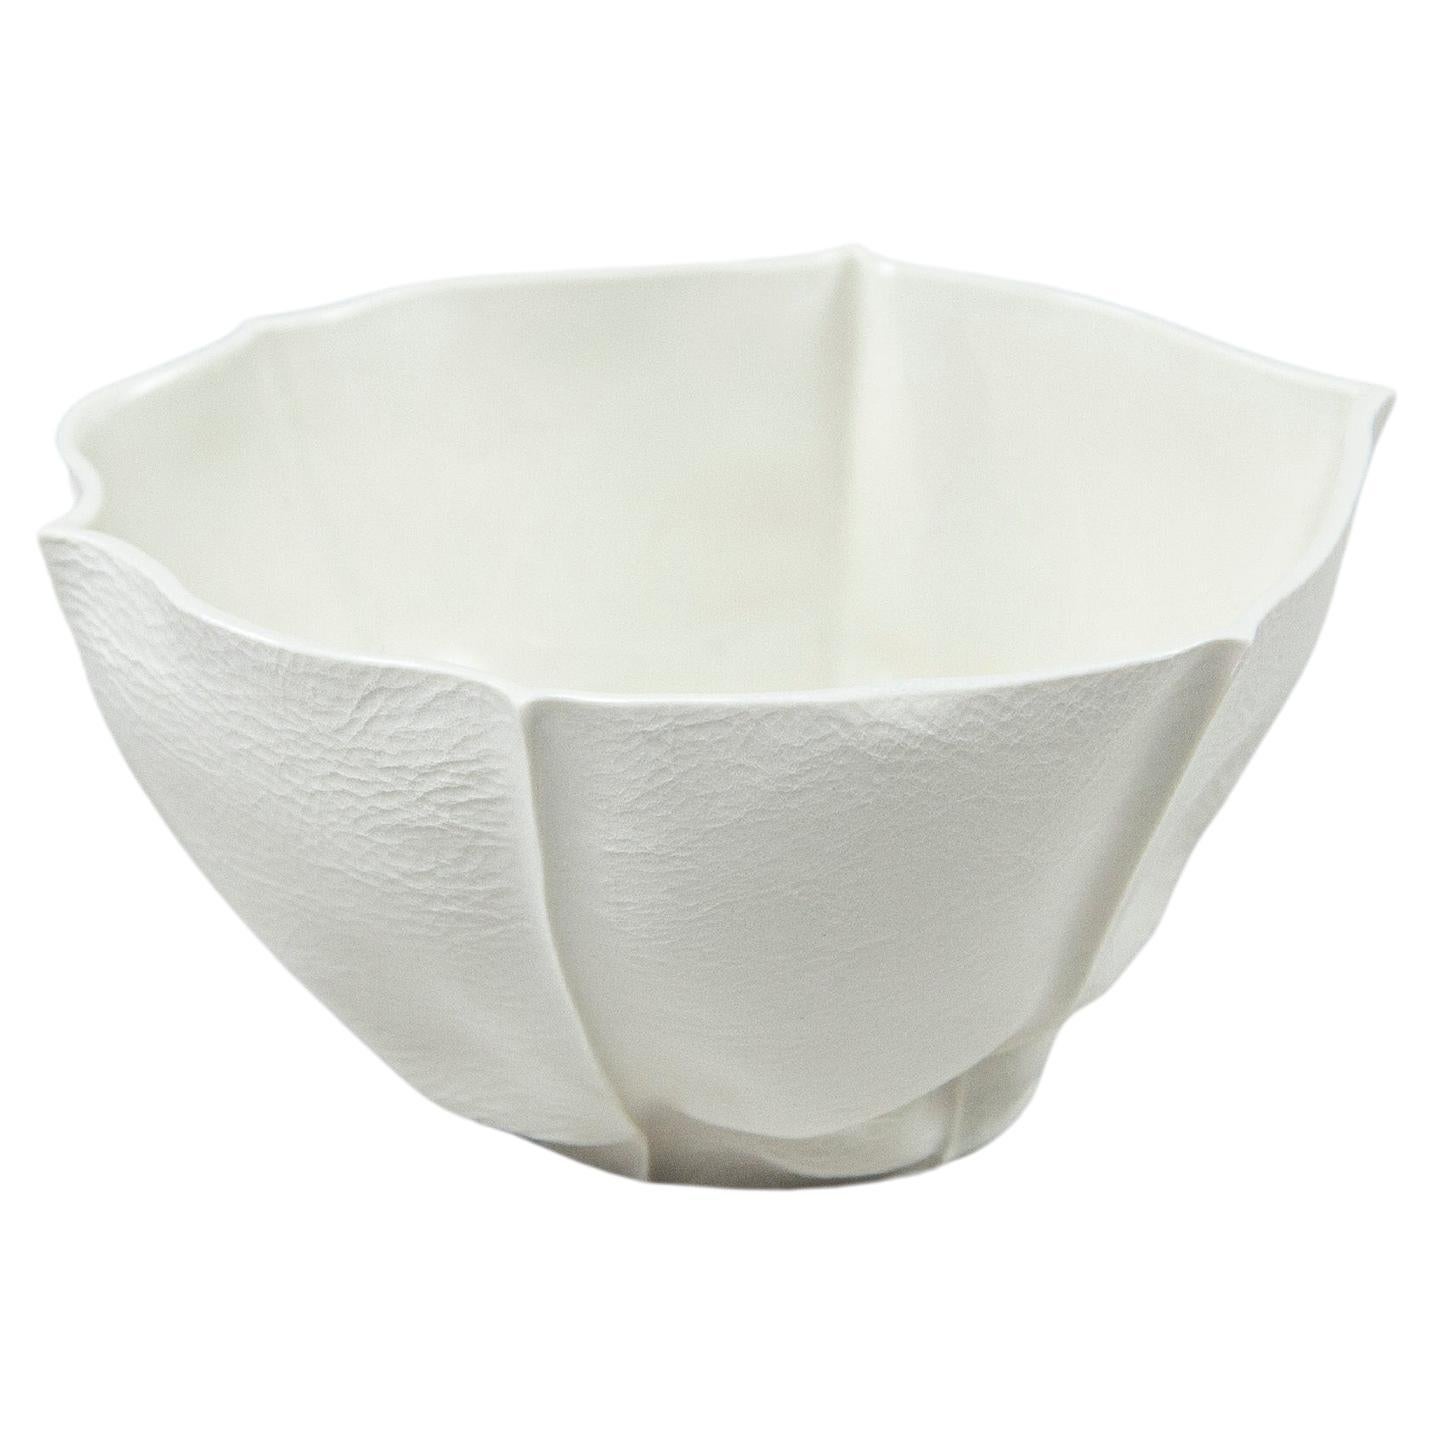 In-stock, White Porcelain Kawa Bowl, Leather Cast Ceramic Vessel, organic form For Sale